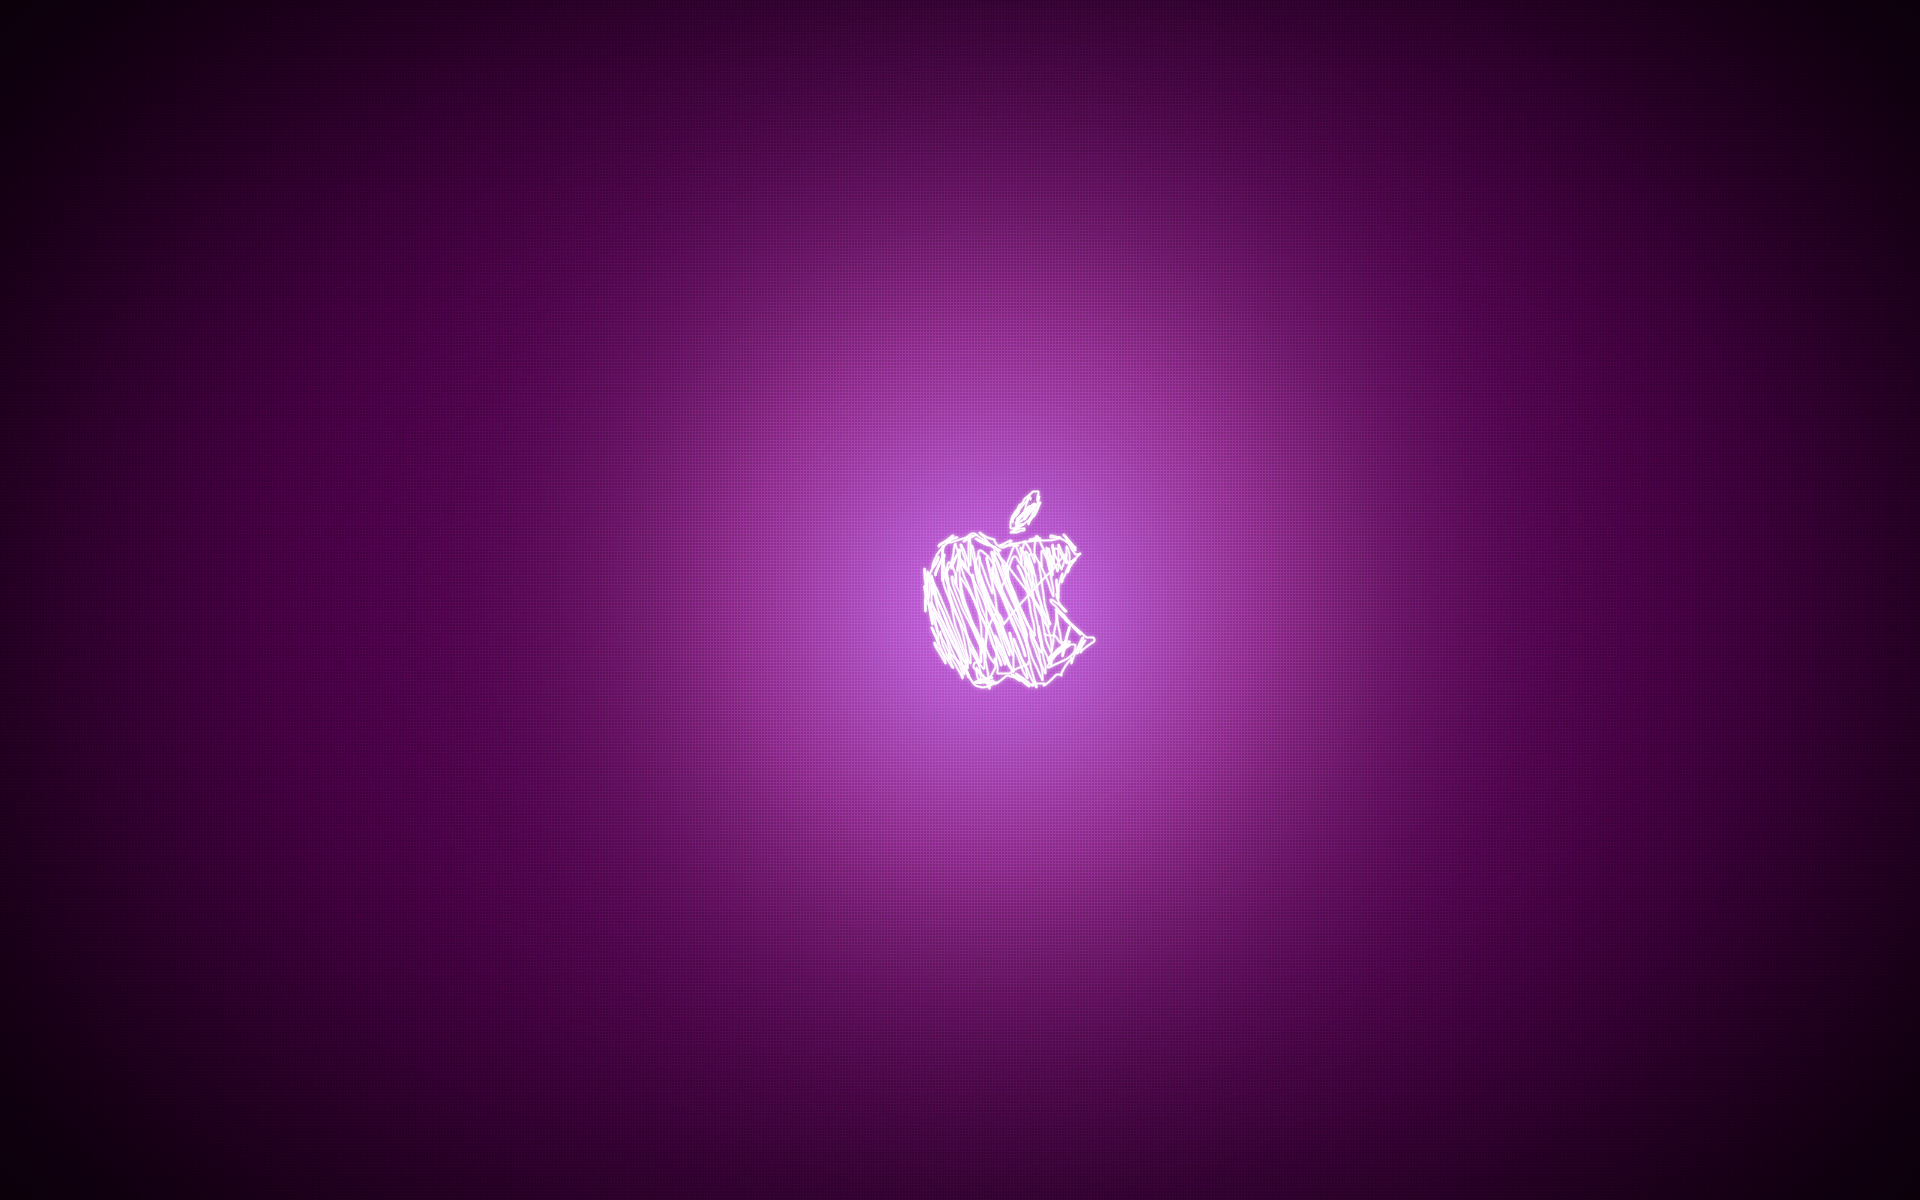  hot pink apple wallpaper  HD Photo Wallpaper Collection HD WALLPAPERS 1920x1200